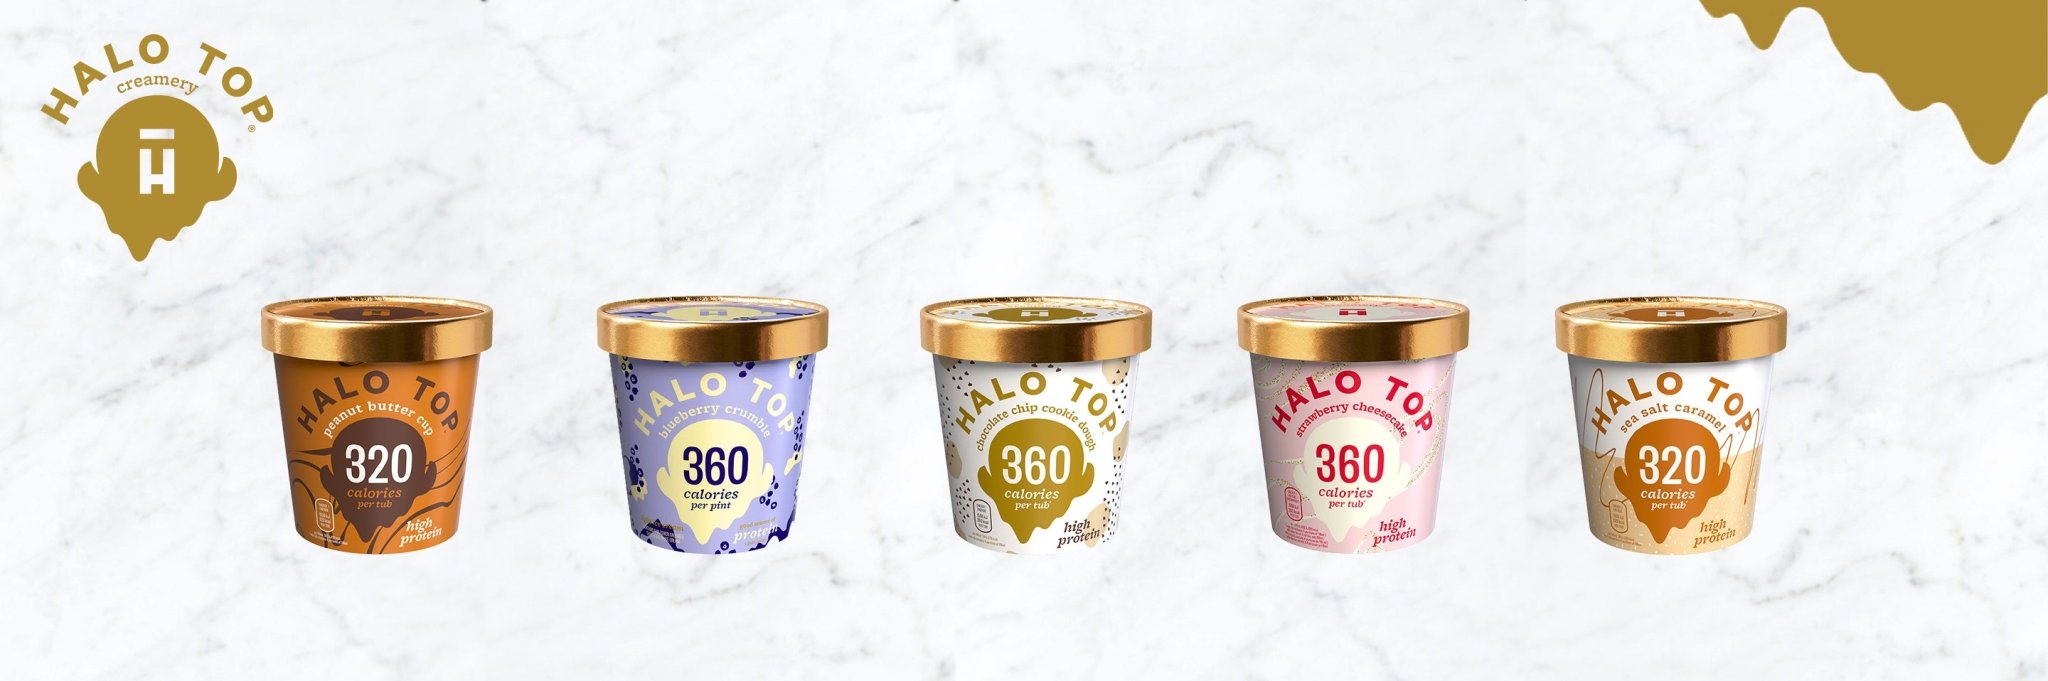 Halo Top- Cheat your calories, not taste –